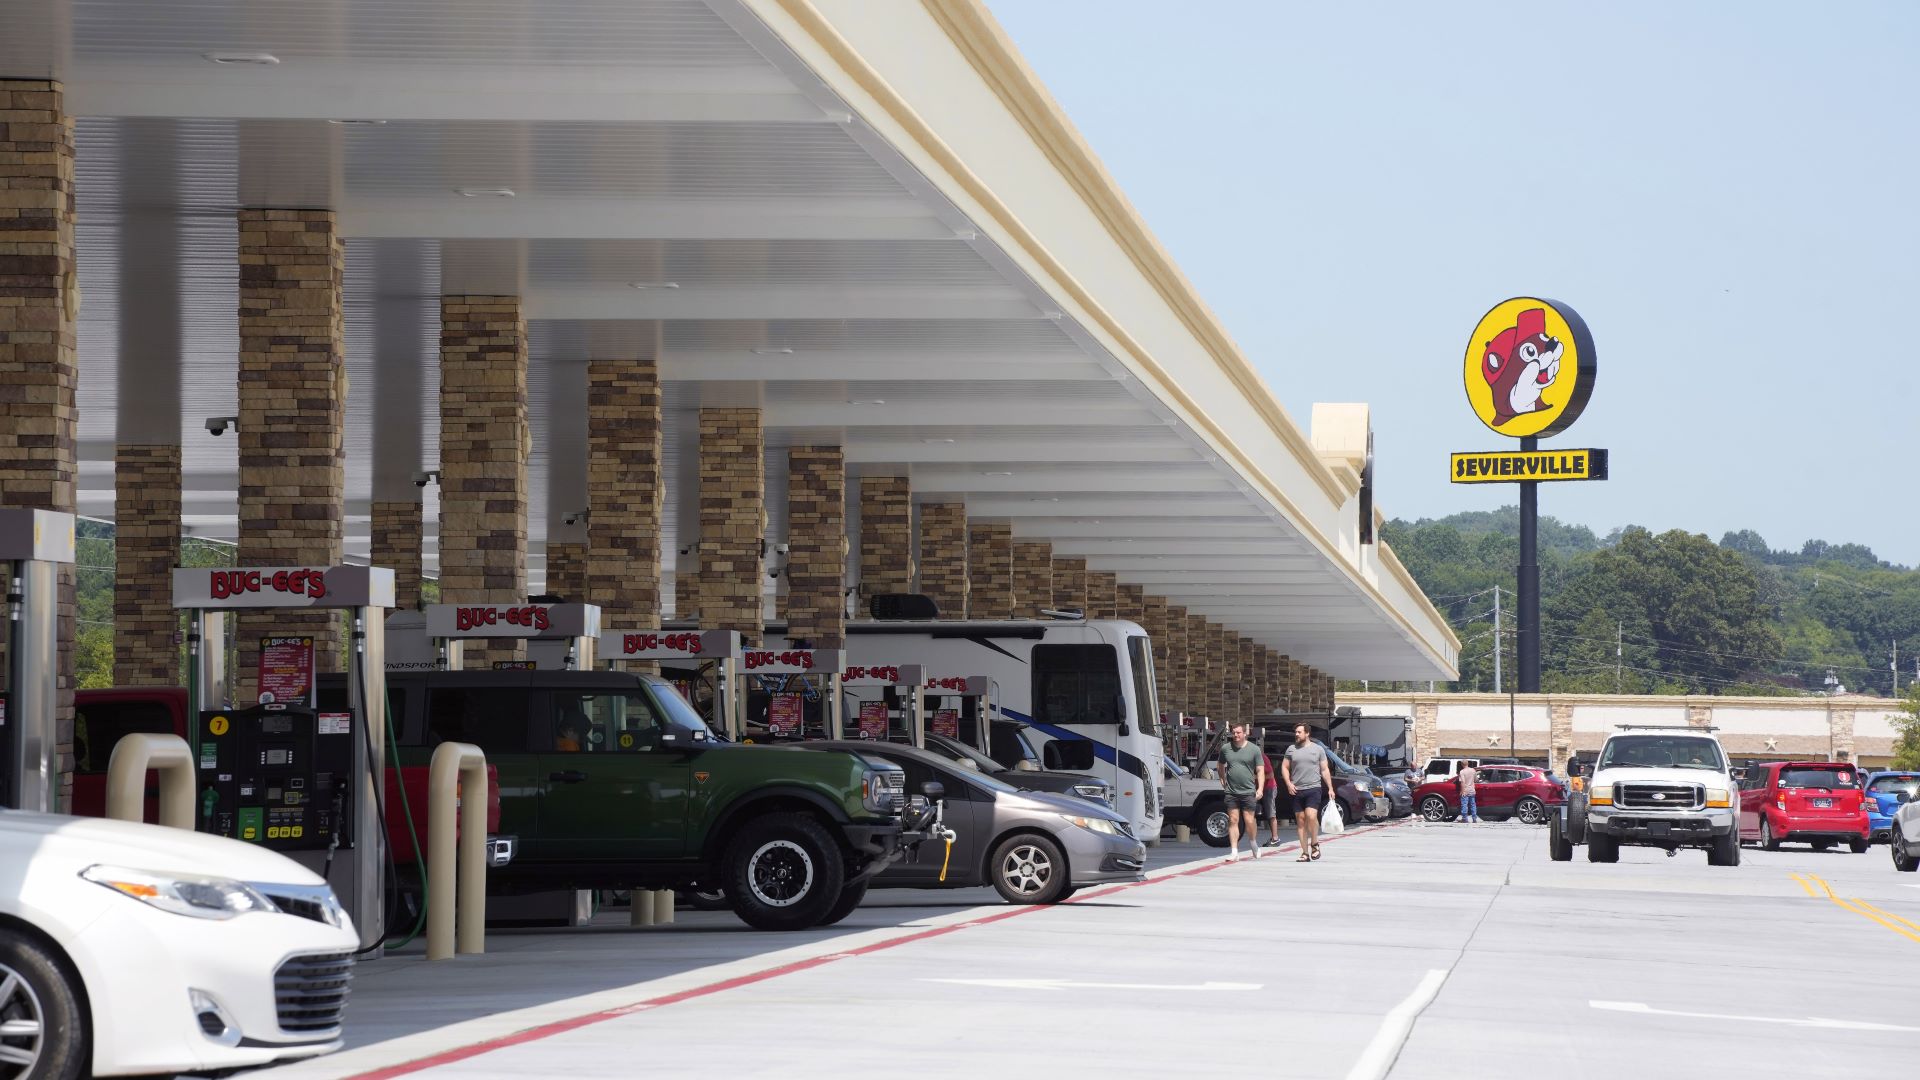 Cars and trucks fuel up at a massive Buc-ee's gas station and convenience store.